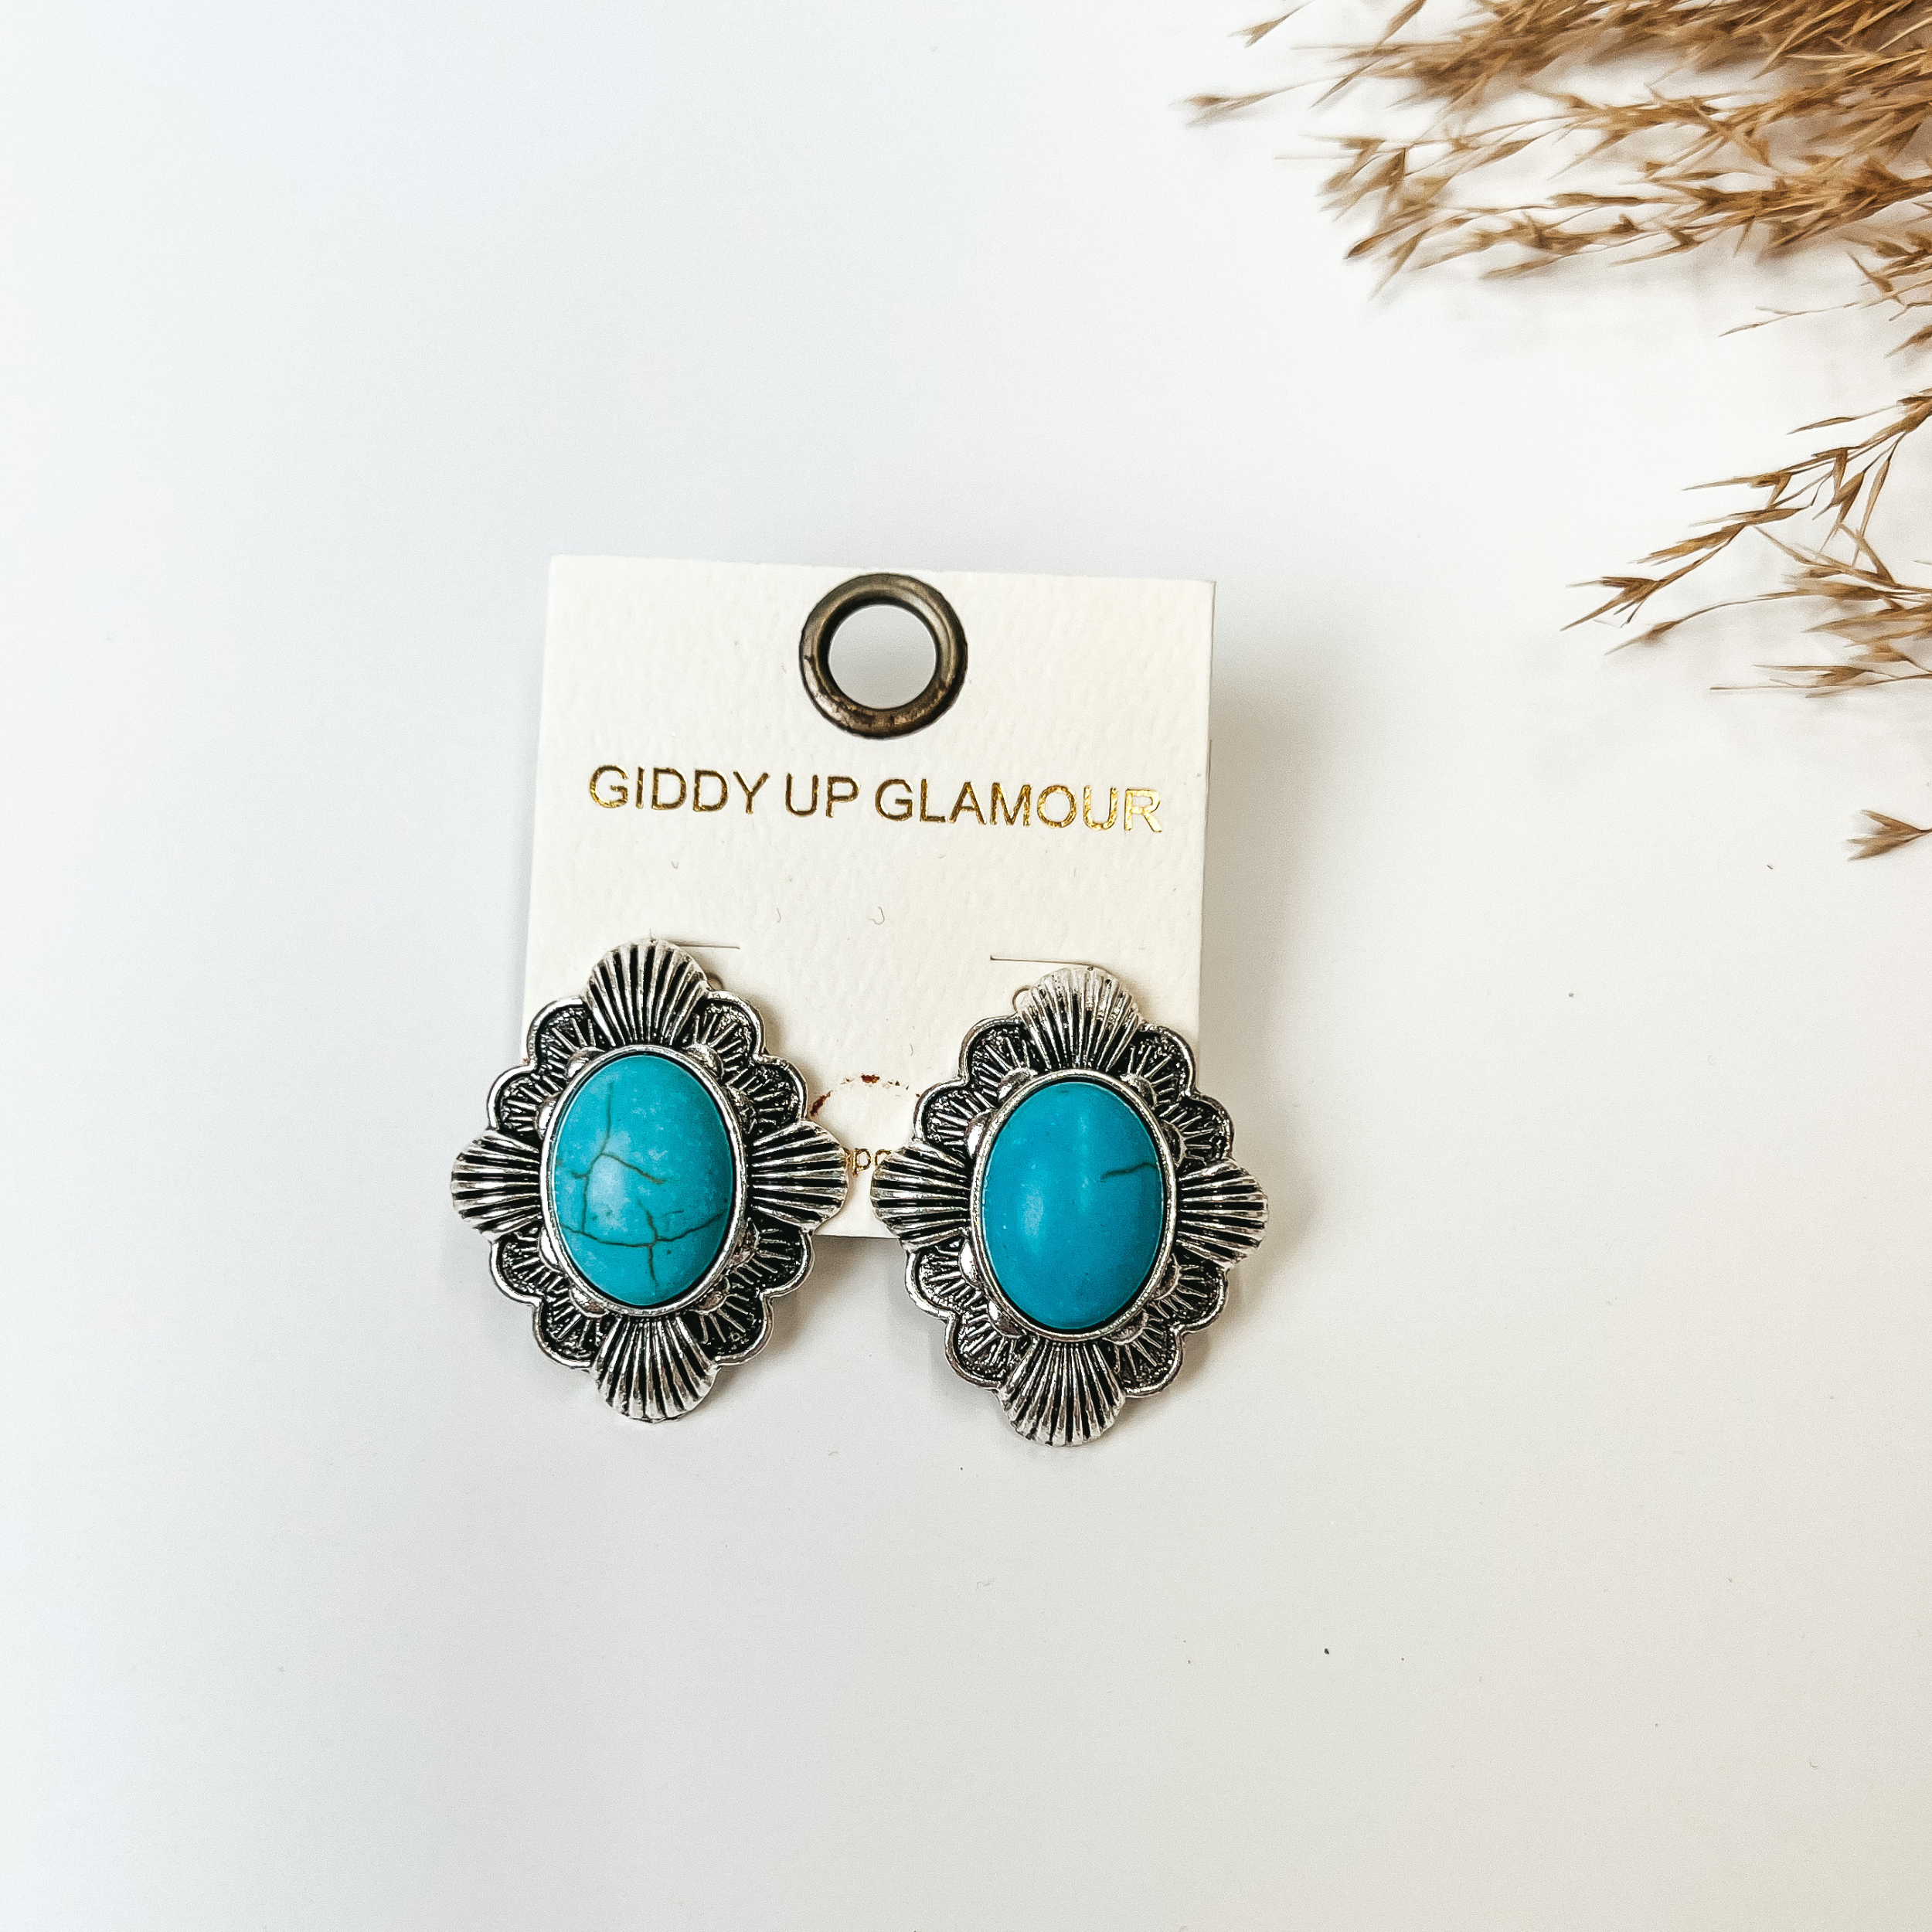 Silver tone post back earrings with oval stone in turquoise, pictured with pampas grass on a white background. 